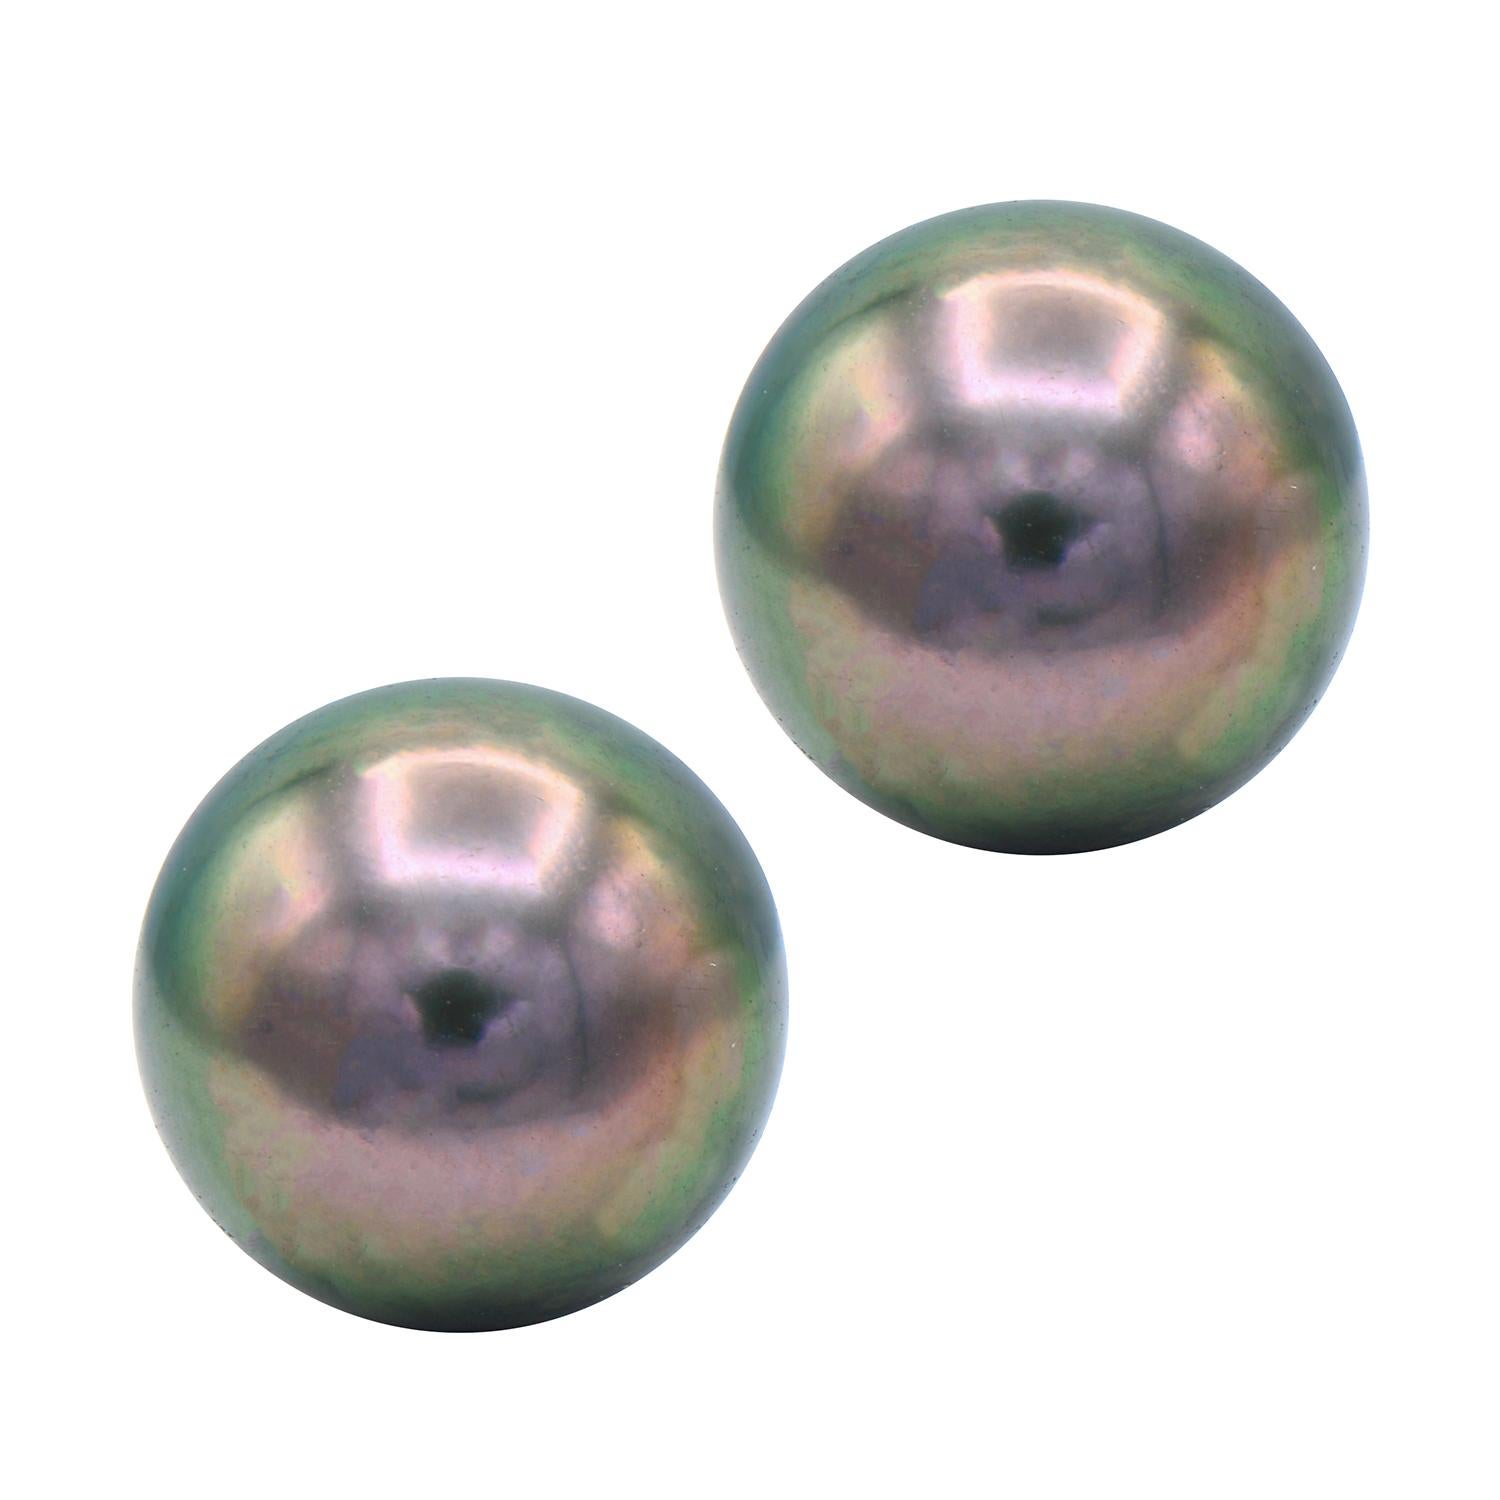 Tahitian Pearl Studs give a little twist to the classic white pearl studs. The Tahitian Pearl Studs are expertly matched in color, luster, and size to make a perfect pair. These 10-10.5mm beautiful pearls are set in 14 karat white gold.